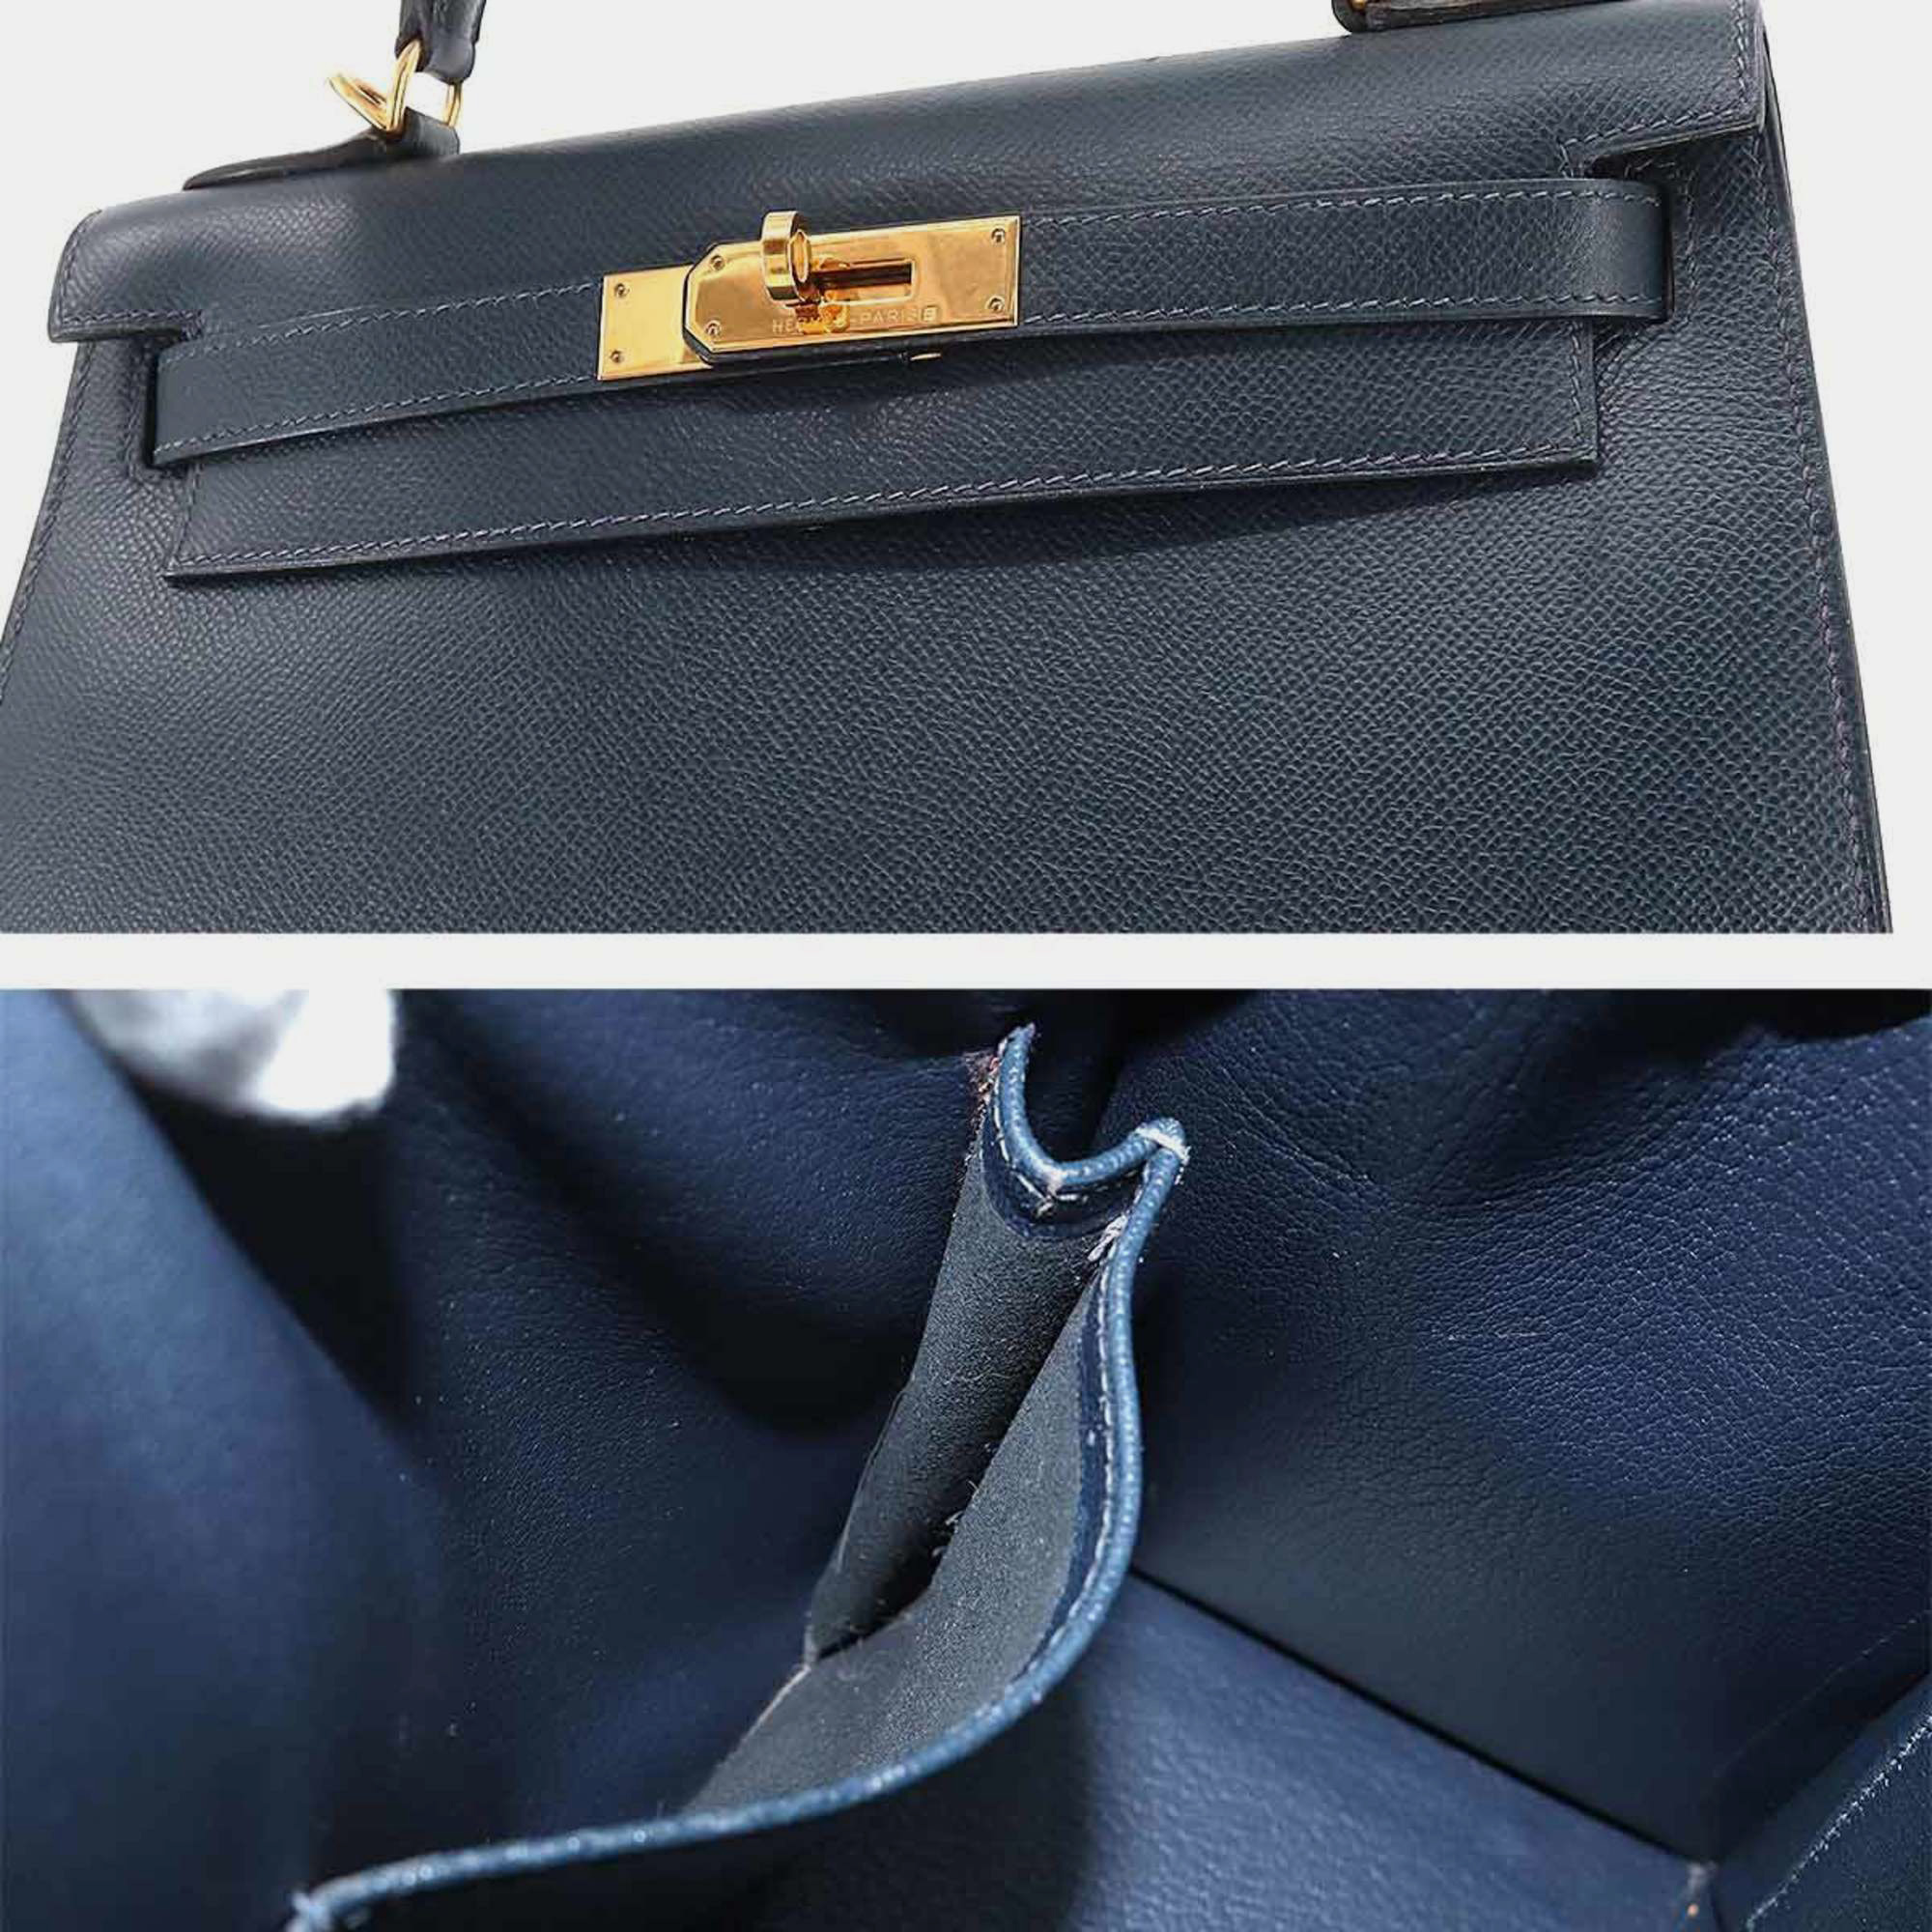 Hermes Kelly 28 2way Hand Shoulder Bag Couchevel Epson Navy E Stamped Outside Stitching Gold Hardware